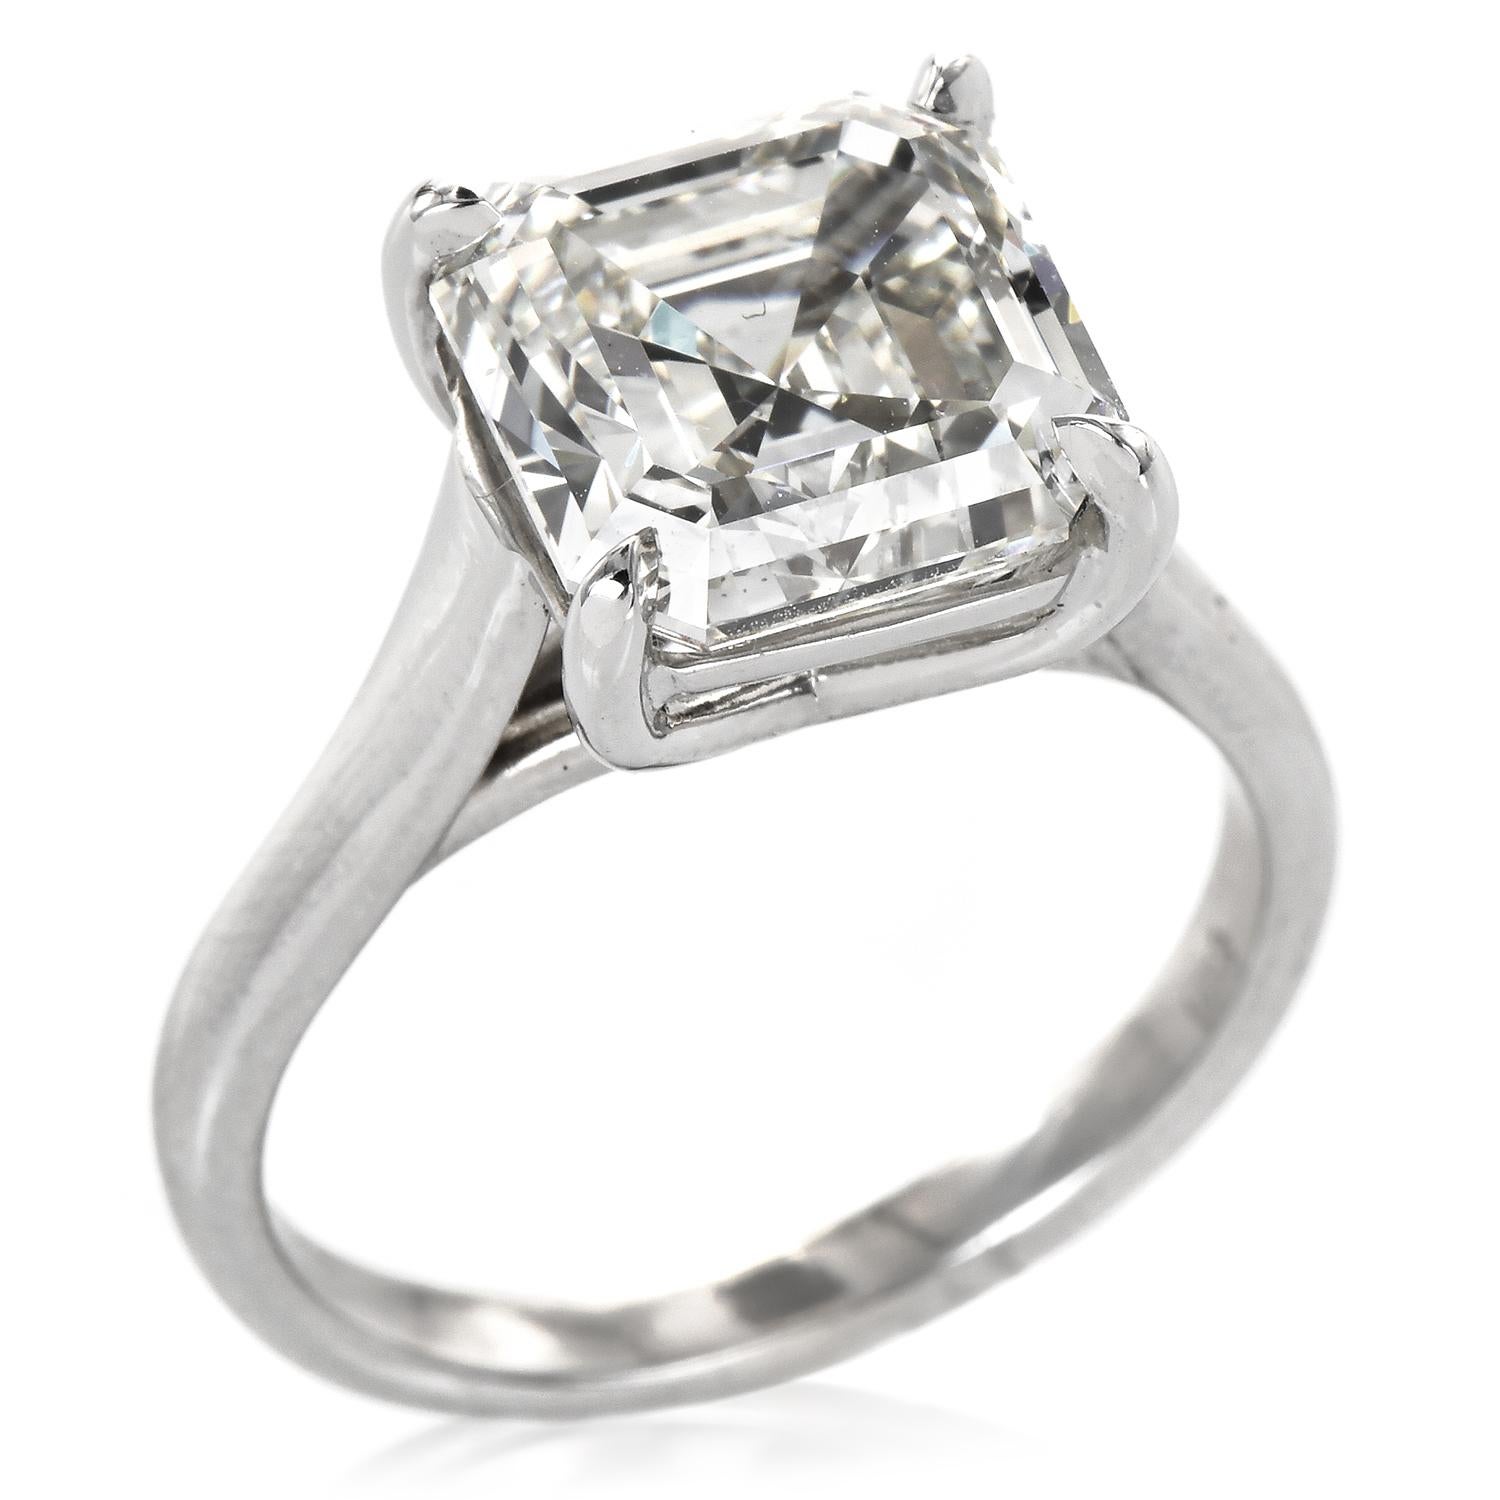 Classic GIA 5.49cts Square Emerald-Cut Diamond Engagement Ring 1